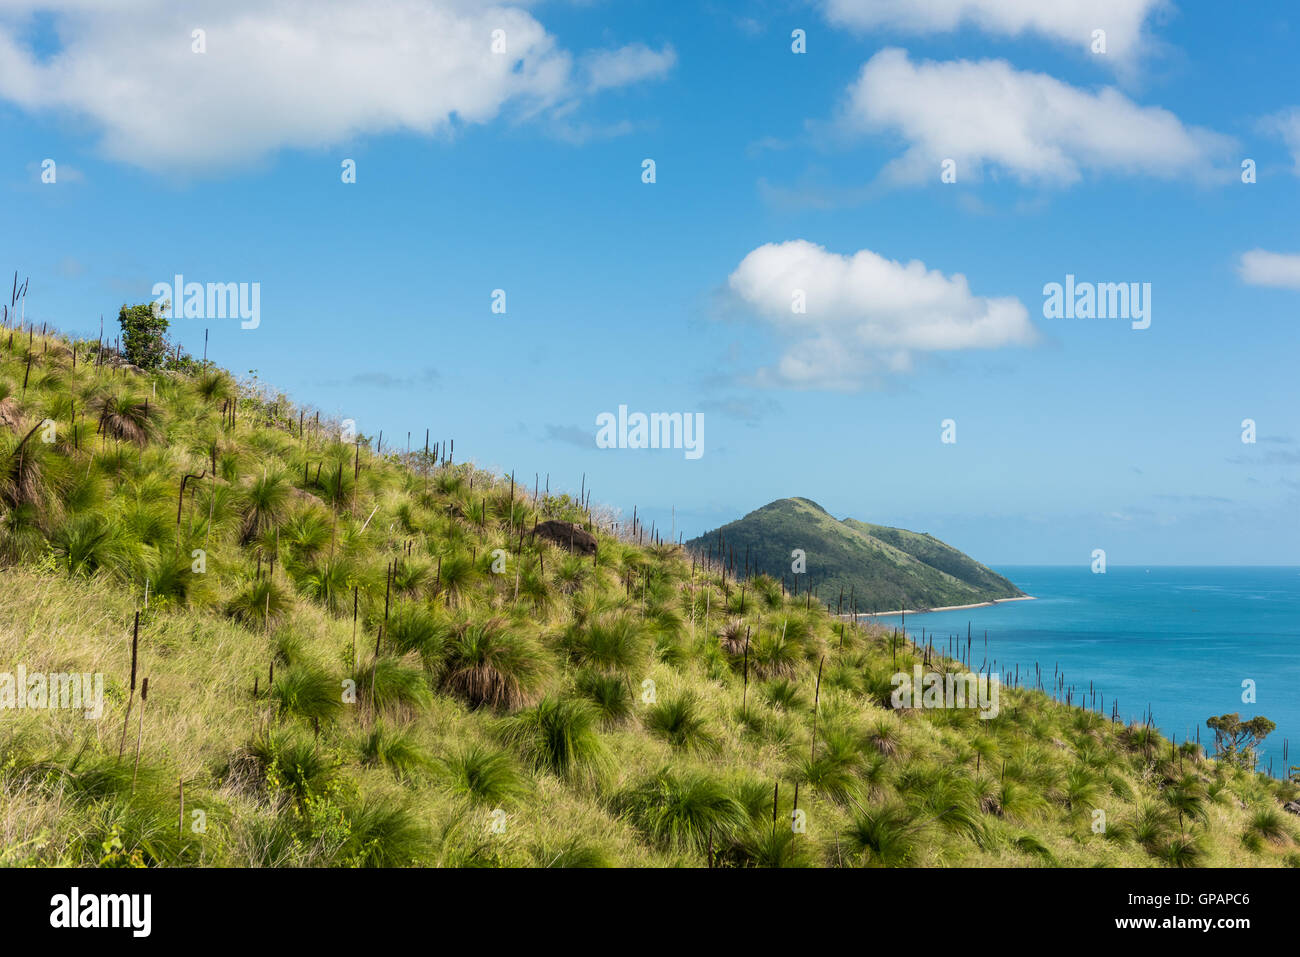 Hiking in lush green nature on South Molle Island, Whitsunday Islands, Queensland, Australia Stock Photo